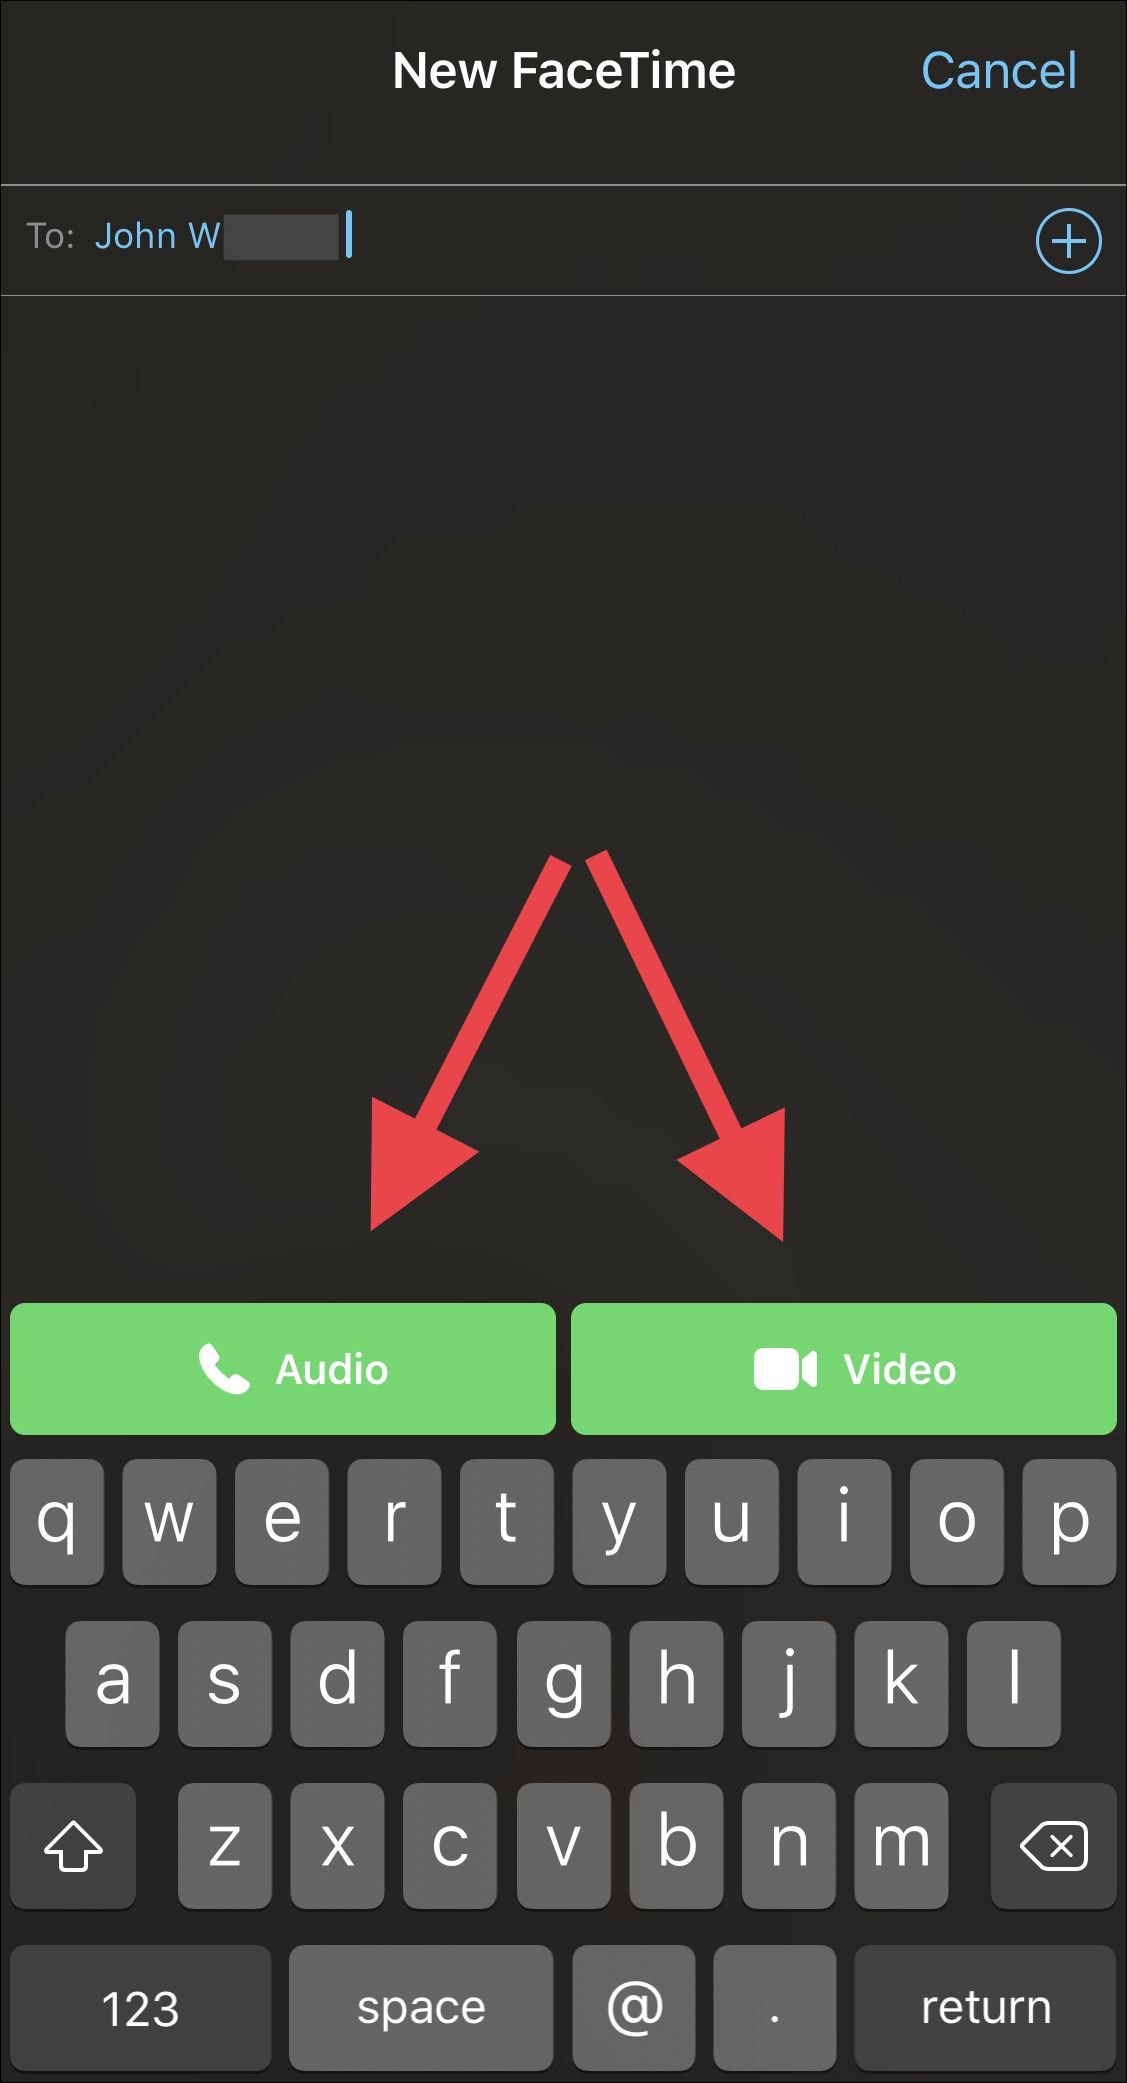 Tap Audio or Video to start a call